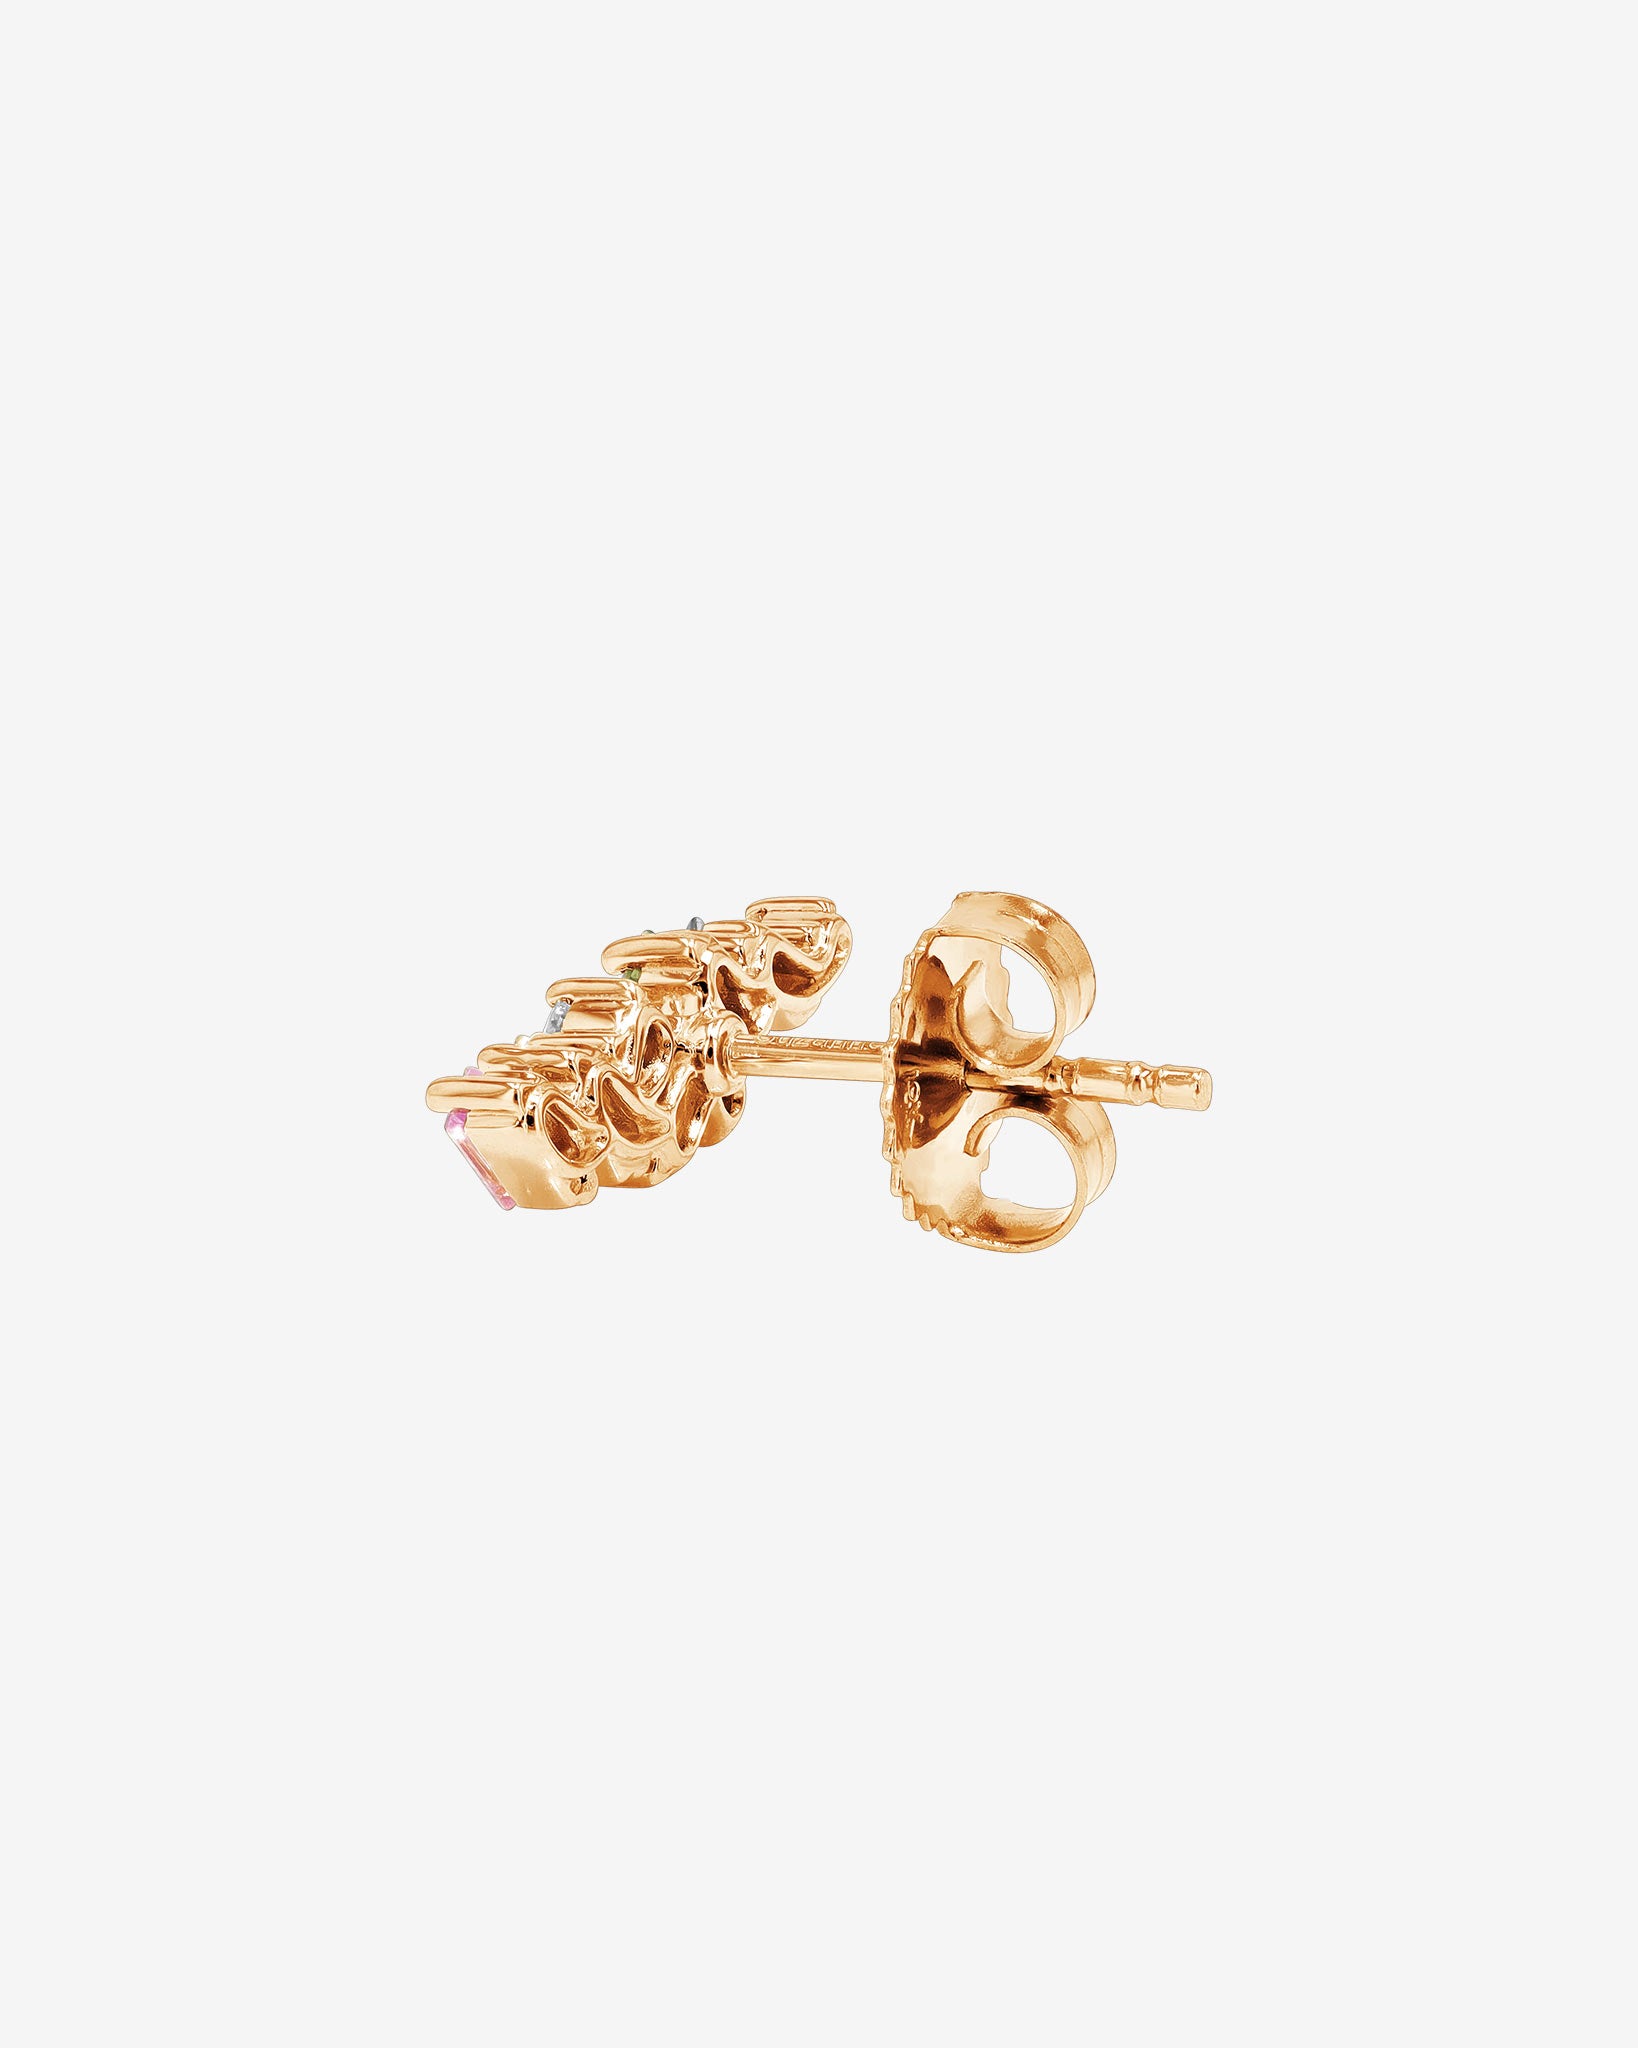 Suzanne Kalan Frenzy Pastel Sapphire Studs in 18k rose gold